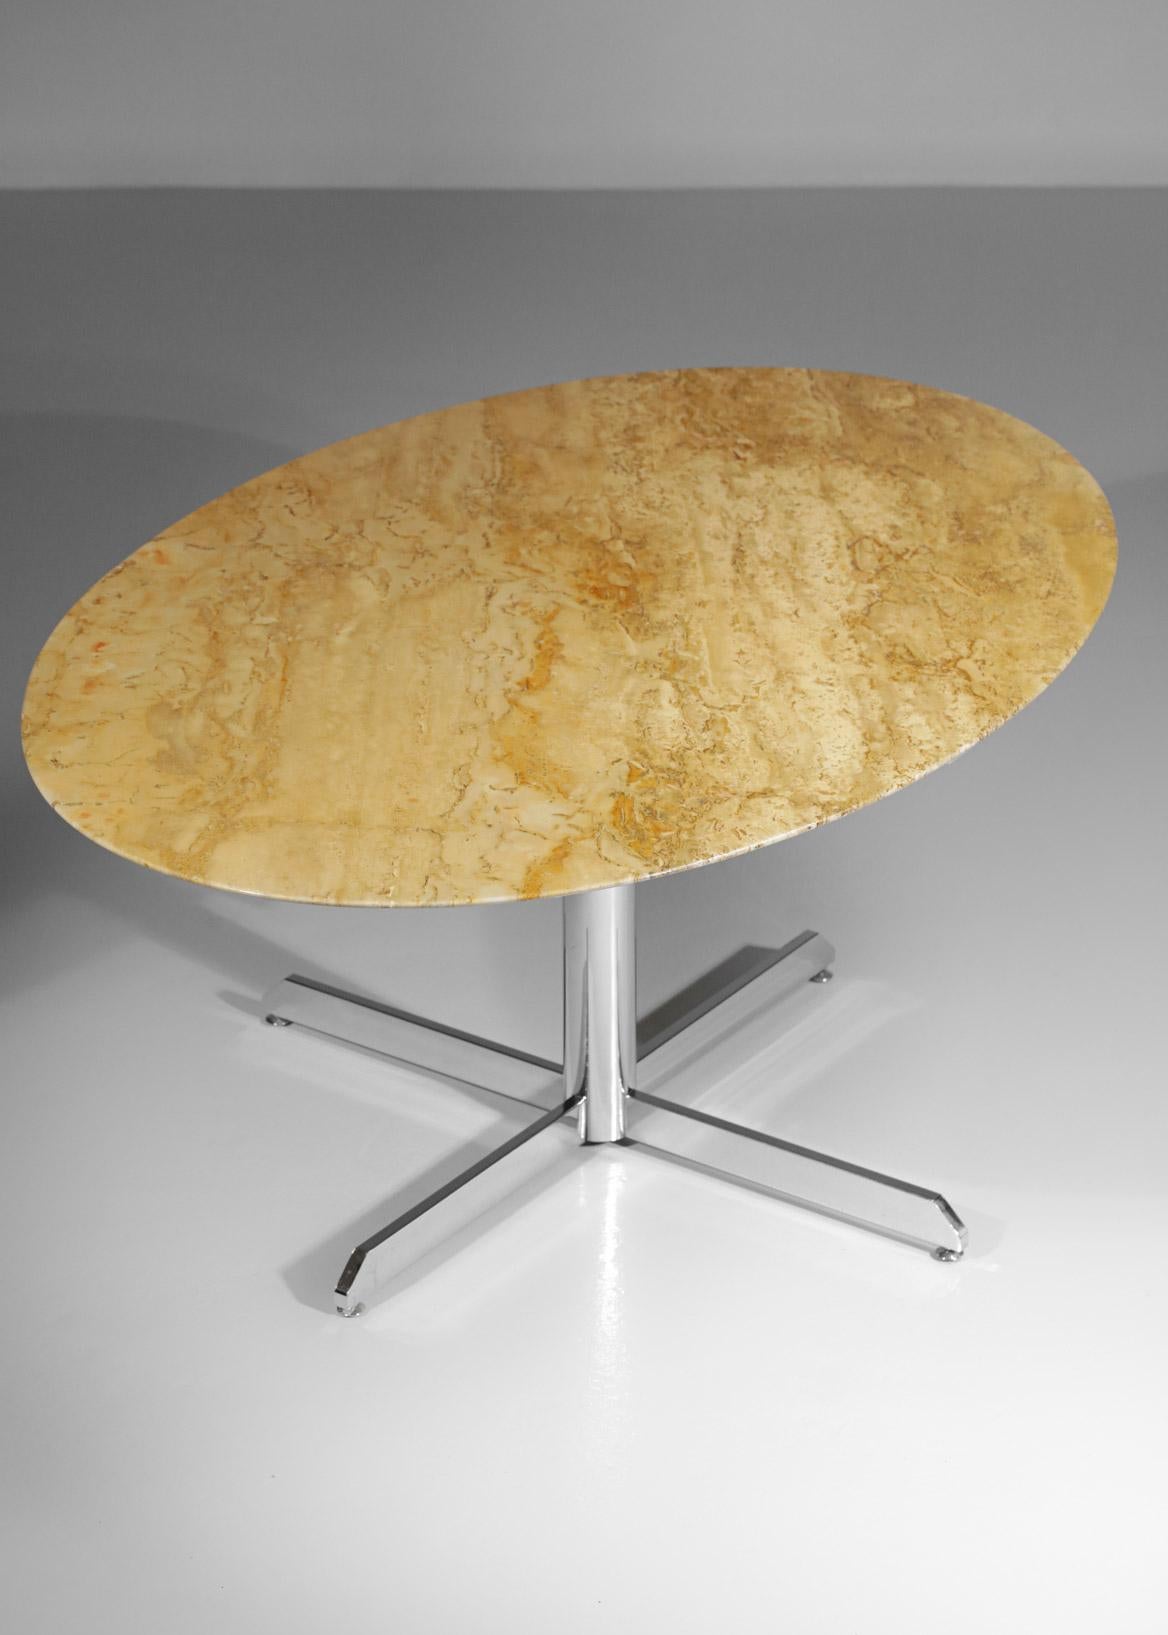 Oval Travertine Marble Dining Table with Chrome Four Star-Feet from the 70's 4